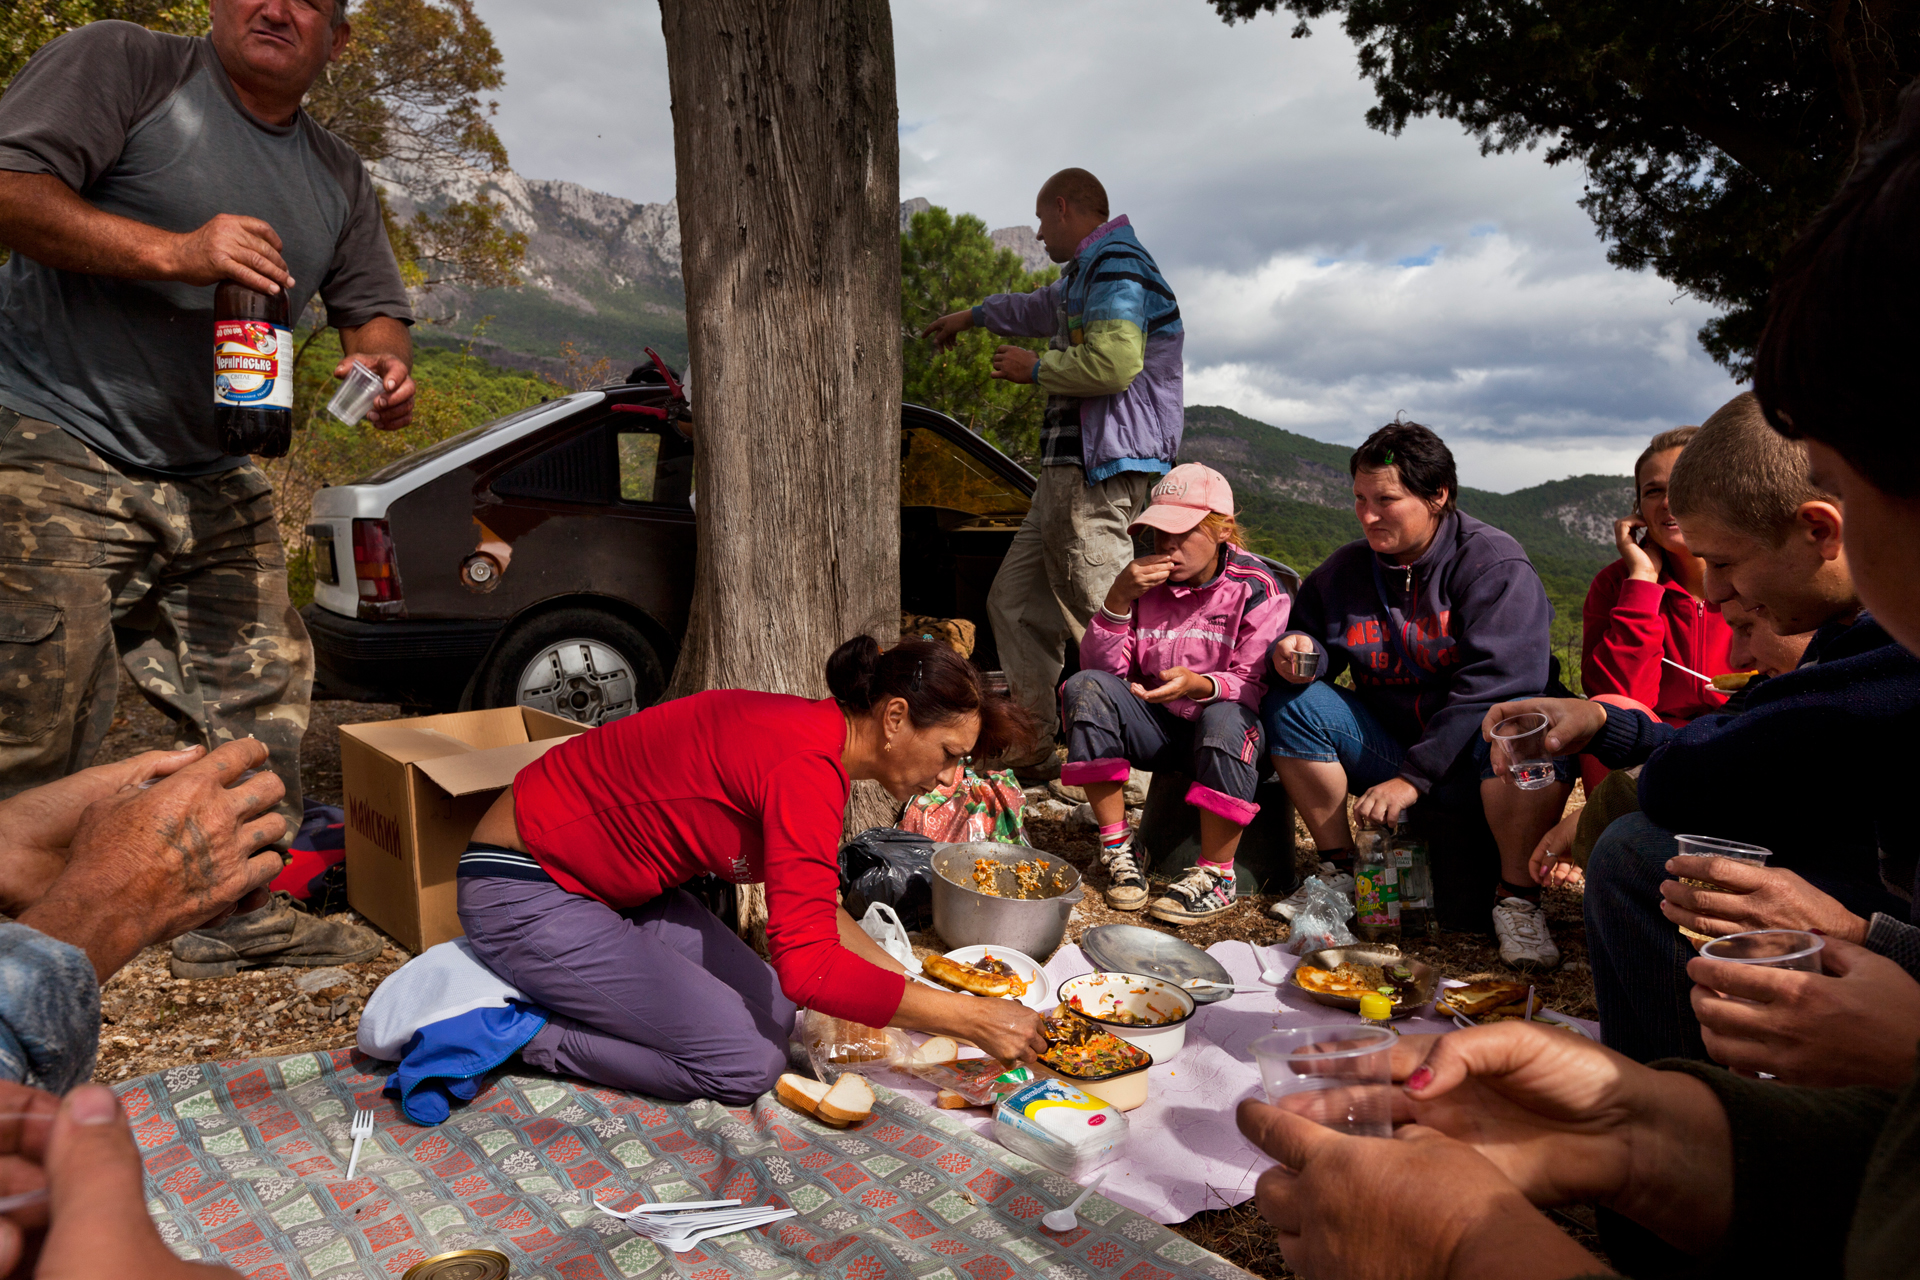  A group of hired grape pickers break for a bucolic lunch in the vineyards near the Crimean coastline.  Near Yalta, Crimea  